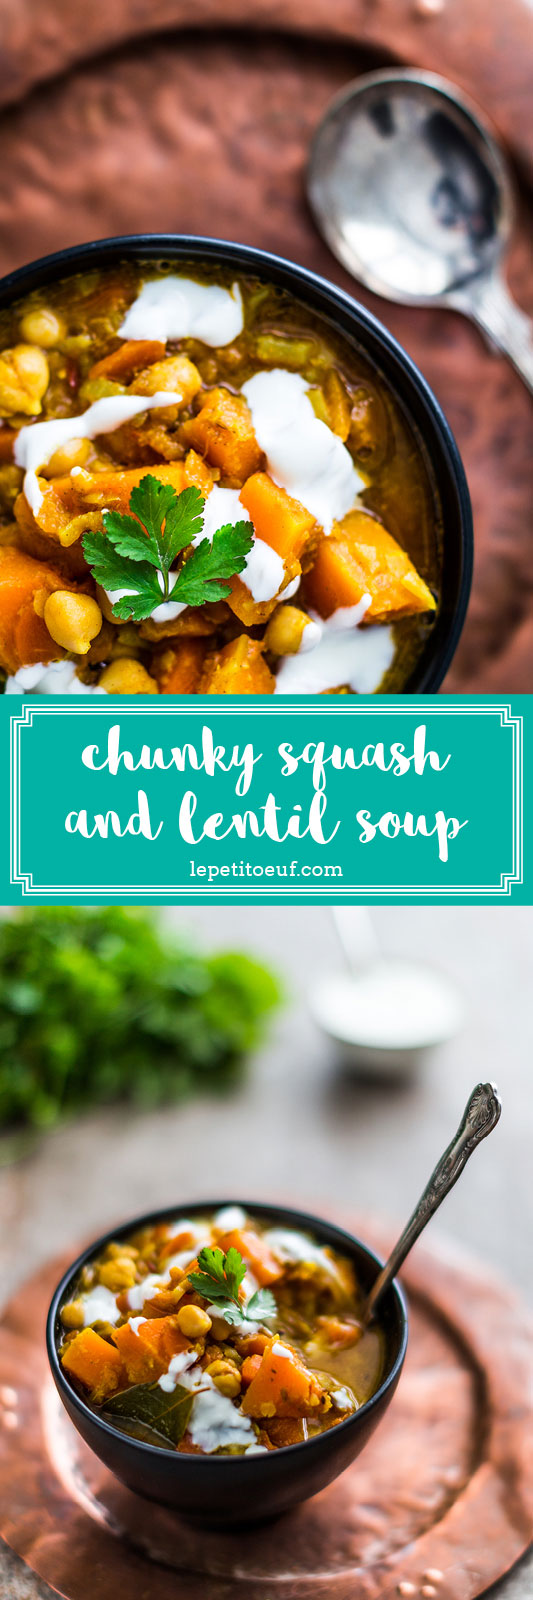 A filling and sustaining chunky soup loaded with goodness and hearty ingredients. This chunky butternut squash and lentil soup is a meal-in-a-bowl which virtually becomes a stew as the liquid is almost entirely soaked up by the lentils, chickpeas and squash. The Indian influenced spices have come in to play, featuring a warming host of flavours which will warm your cockles even when the temperature's so cold that the central heating doesn't. It's so good that it's my lunch bowl for the next three weeks, yes, I've just made a triple batch of this, giving me a happy fridge and freezer full of lunchtime joy.